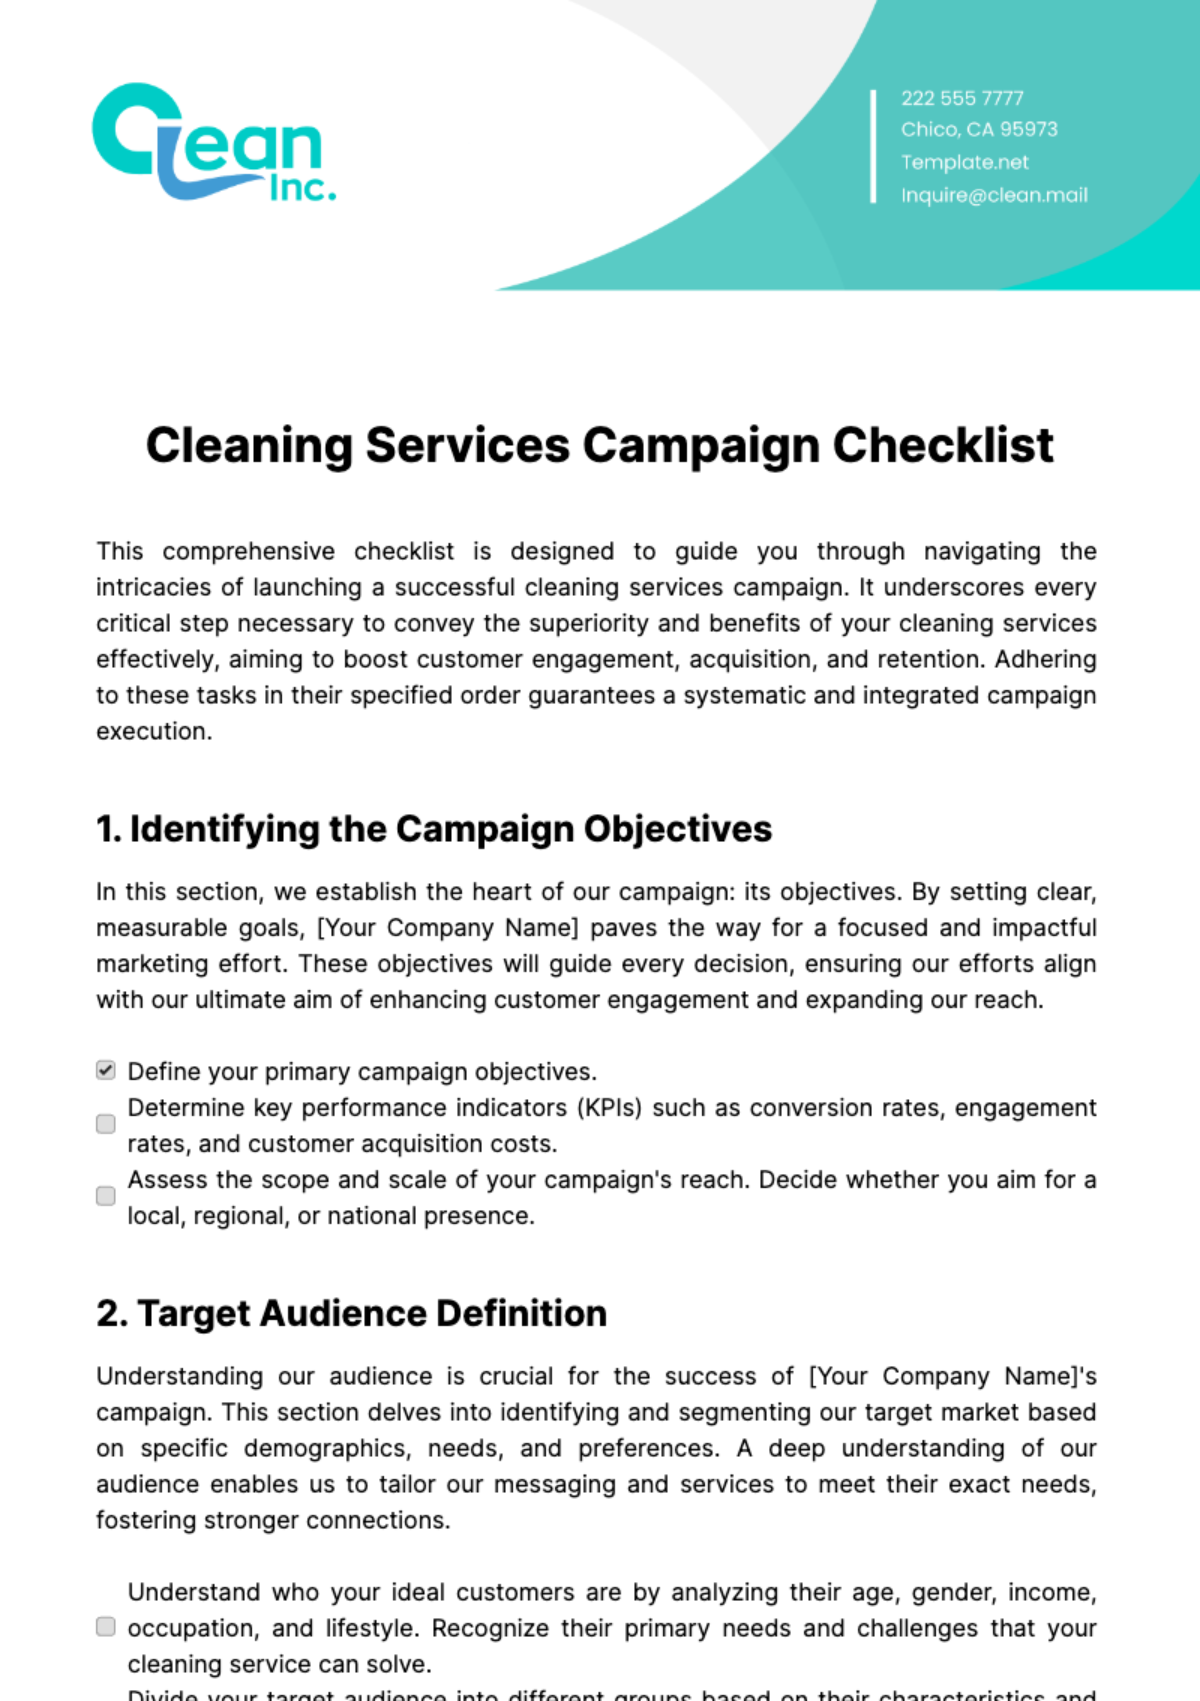 Cleaning Services Campaign Checklist Template